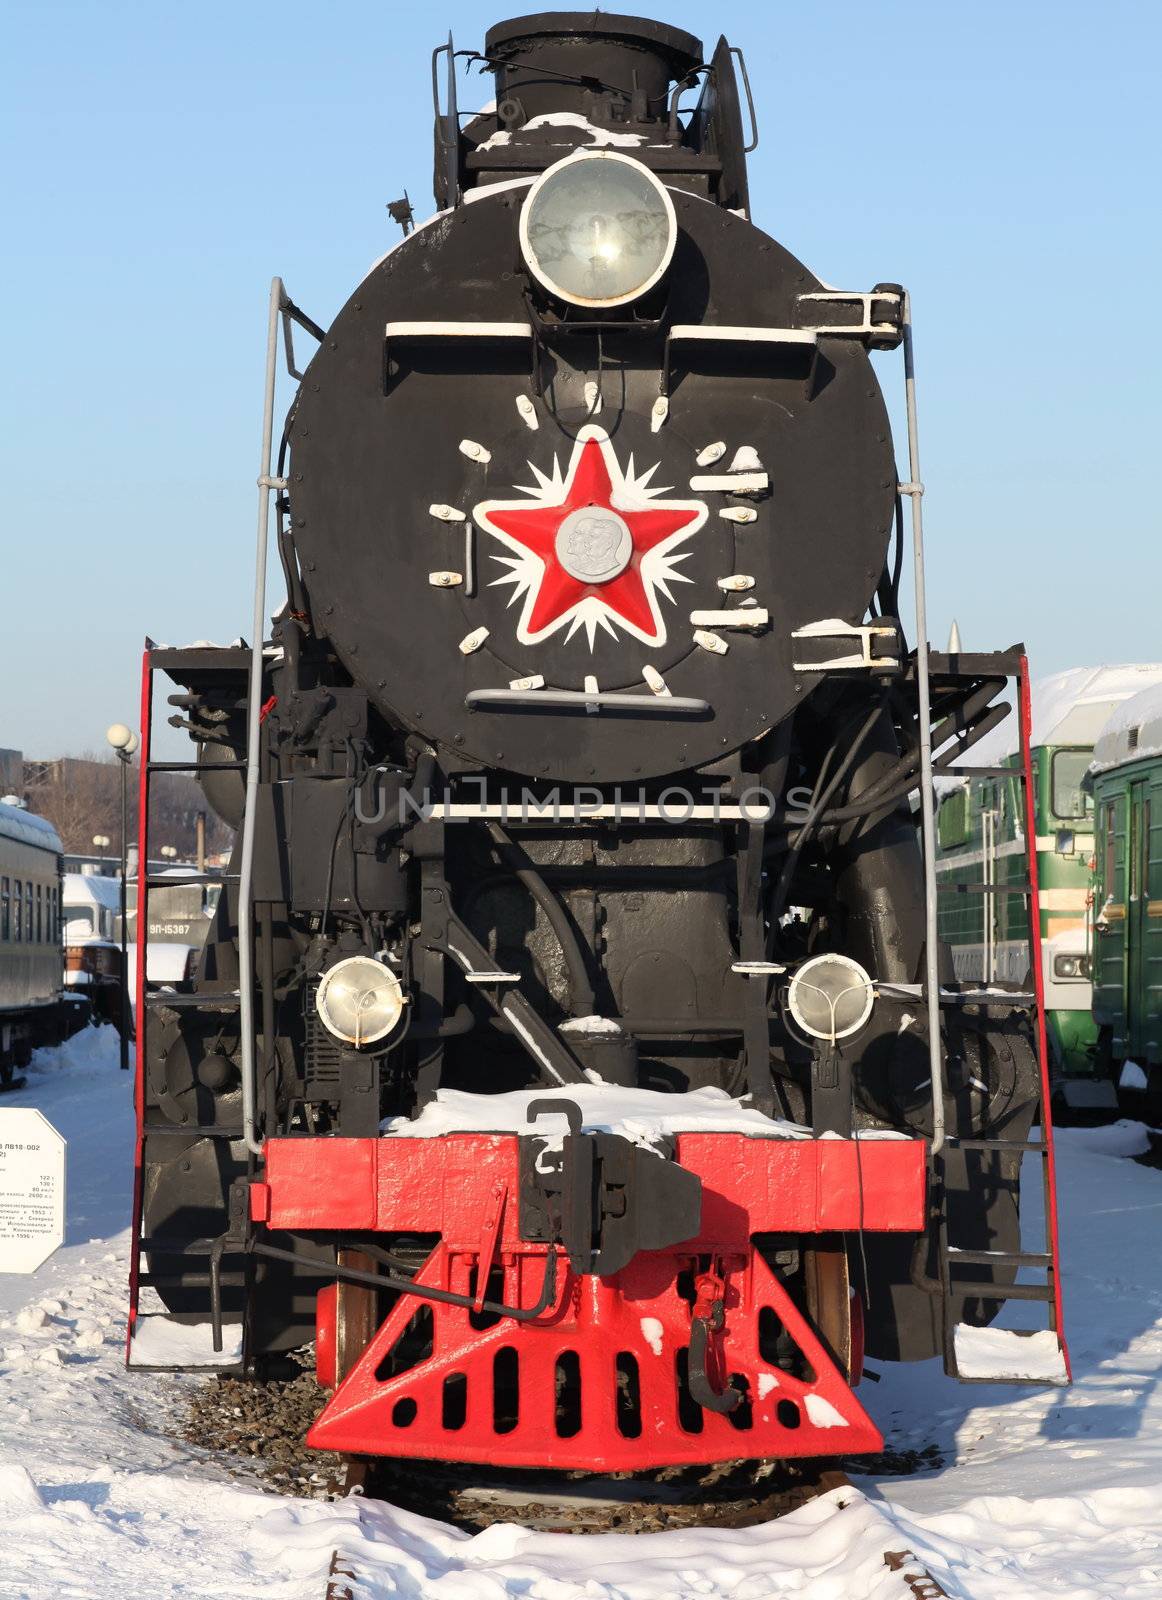 old locomotive at a train station in winter